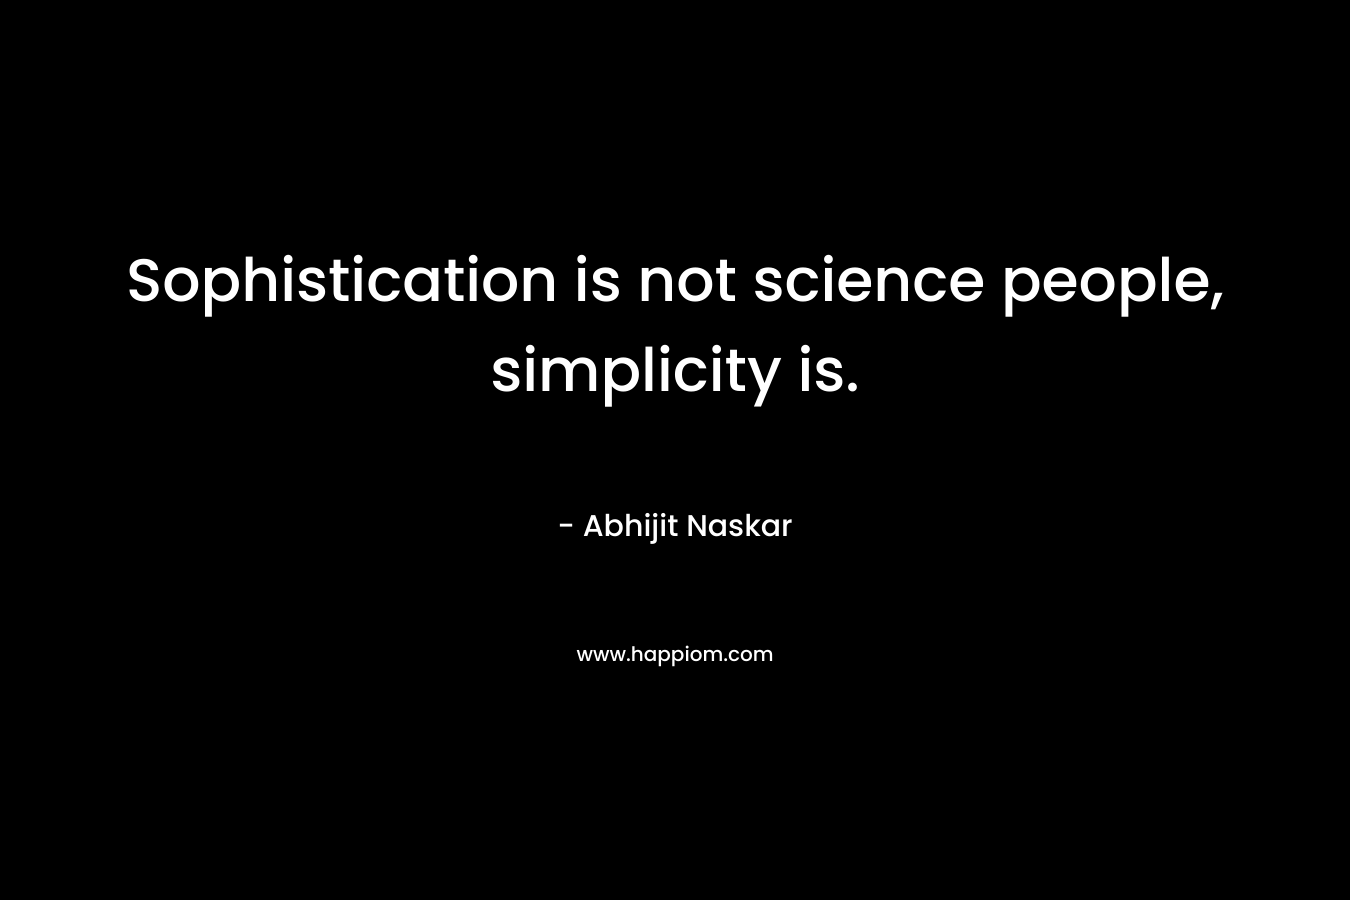 Sophistication is not science people, simplicity is.